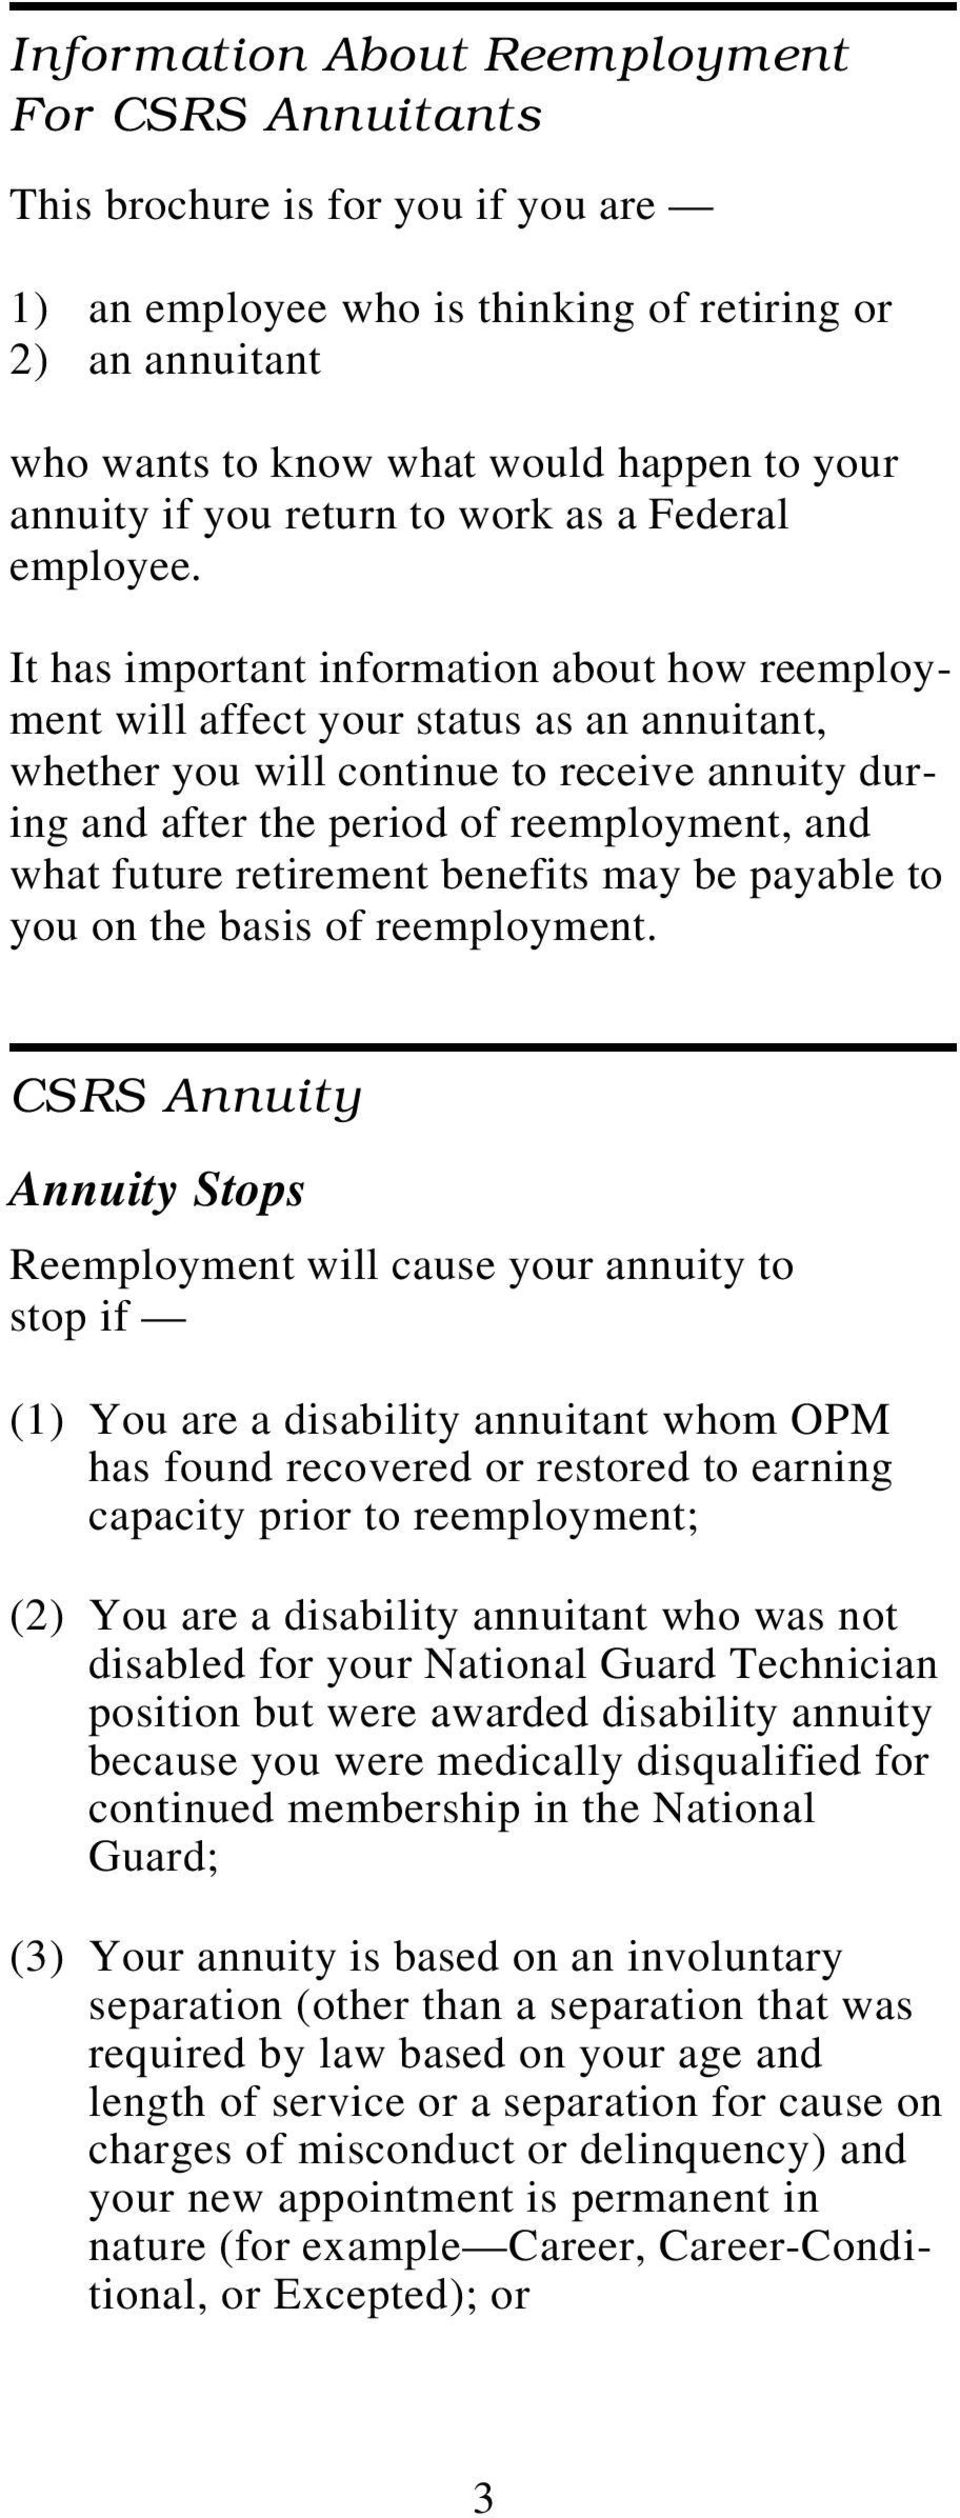 It has important information about how reemployment will affect your status as an annuitant, whether you will continue to receive annuity during and after the period of reemployment, and what future